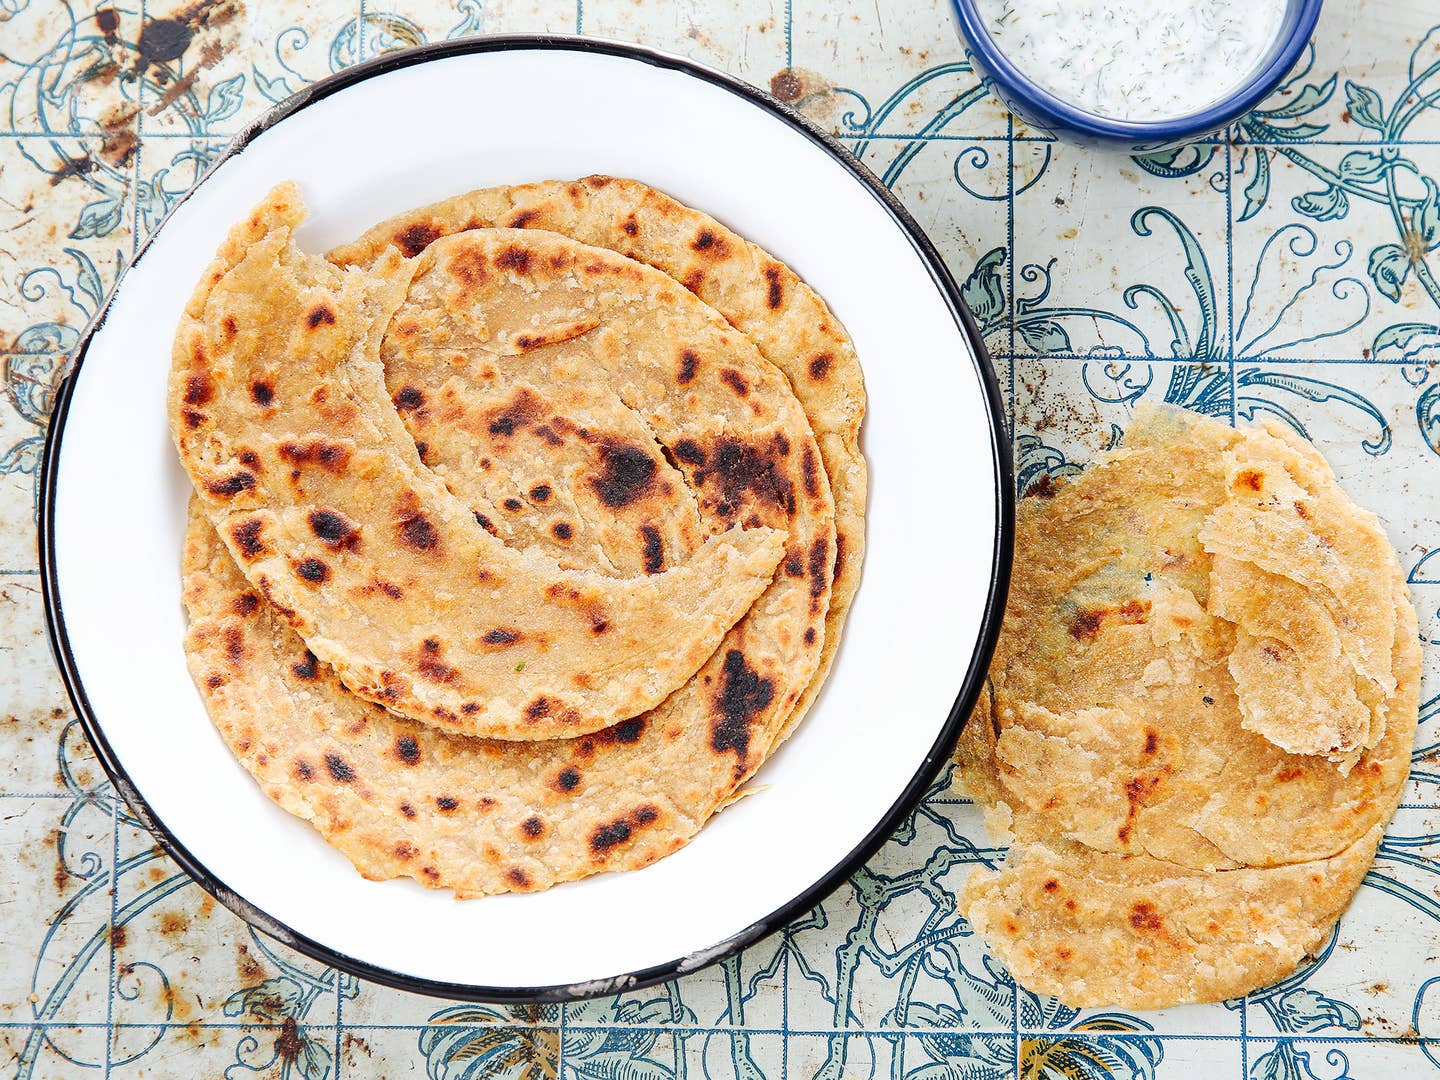 How to Make Roti, the Essential All-Purpose Indian Flatbread